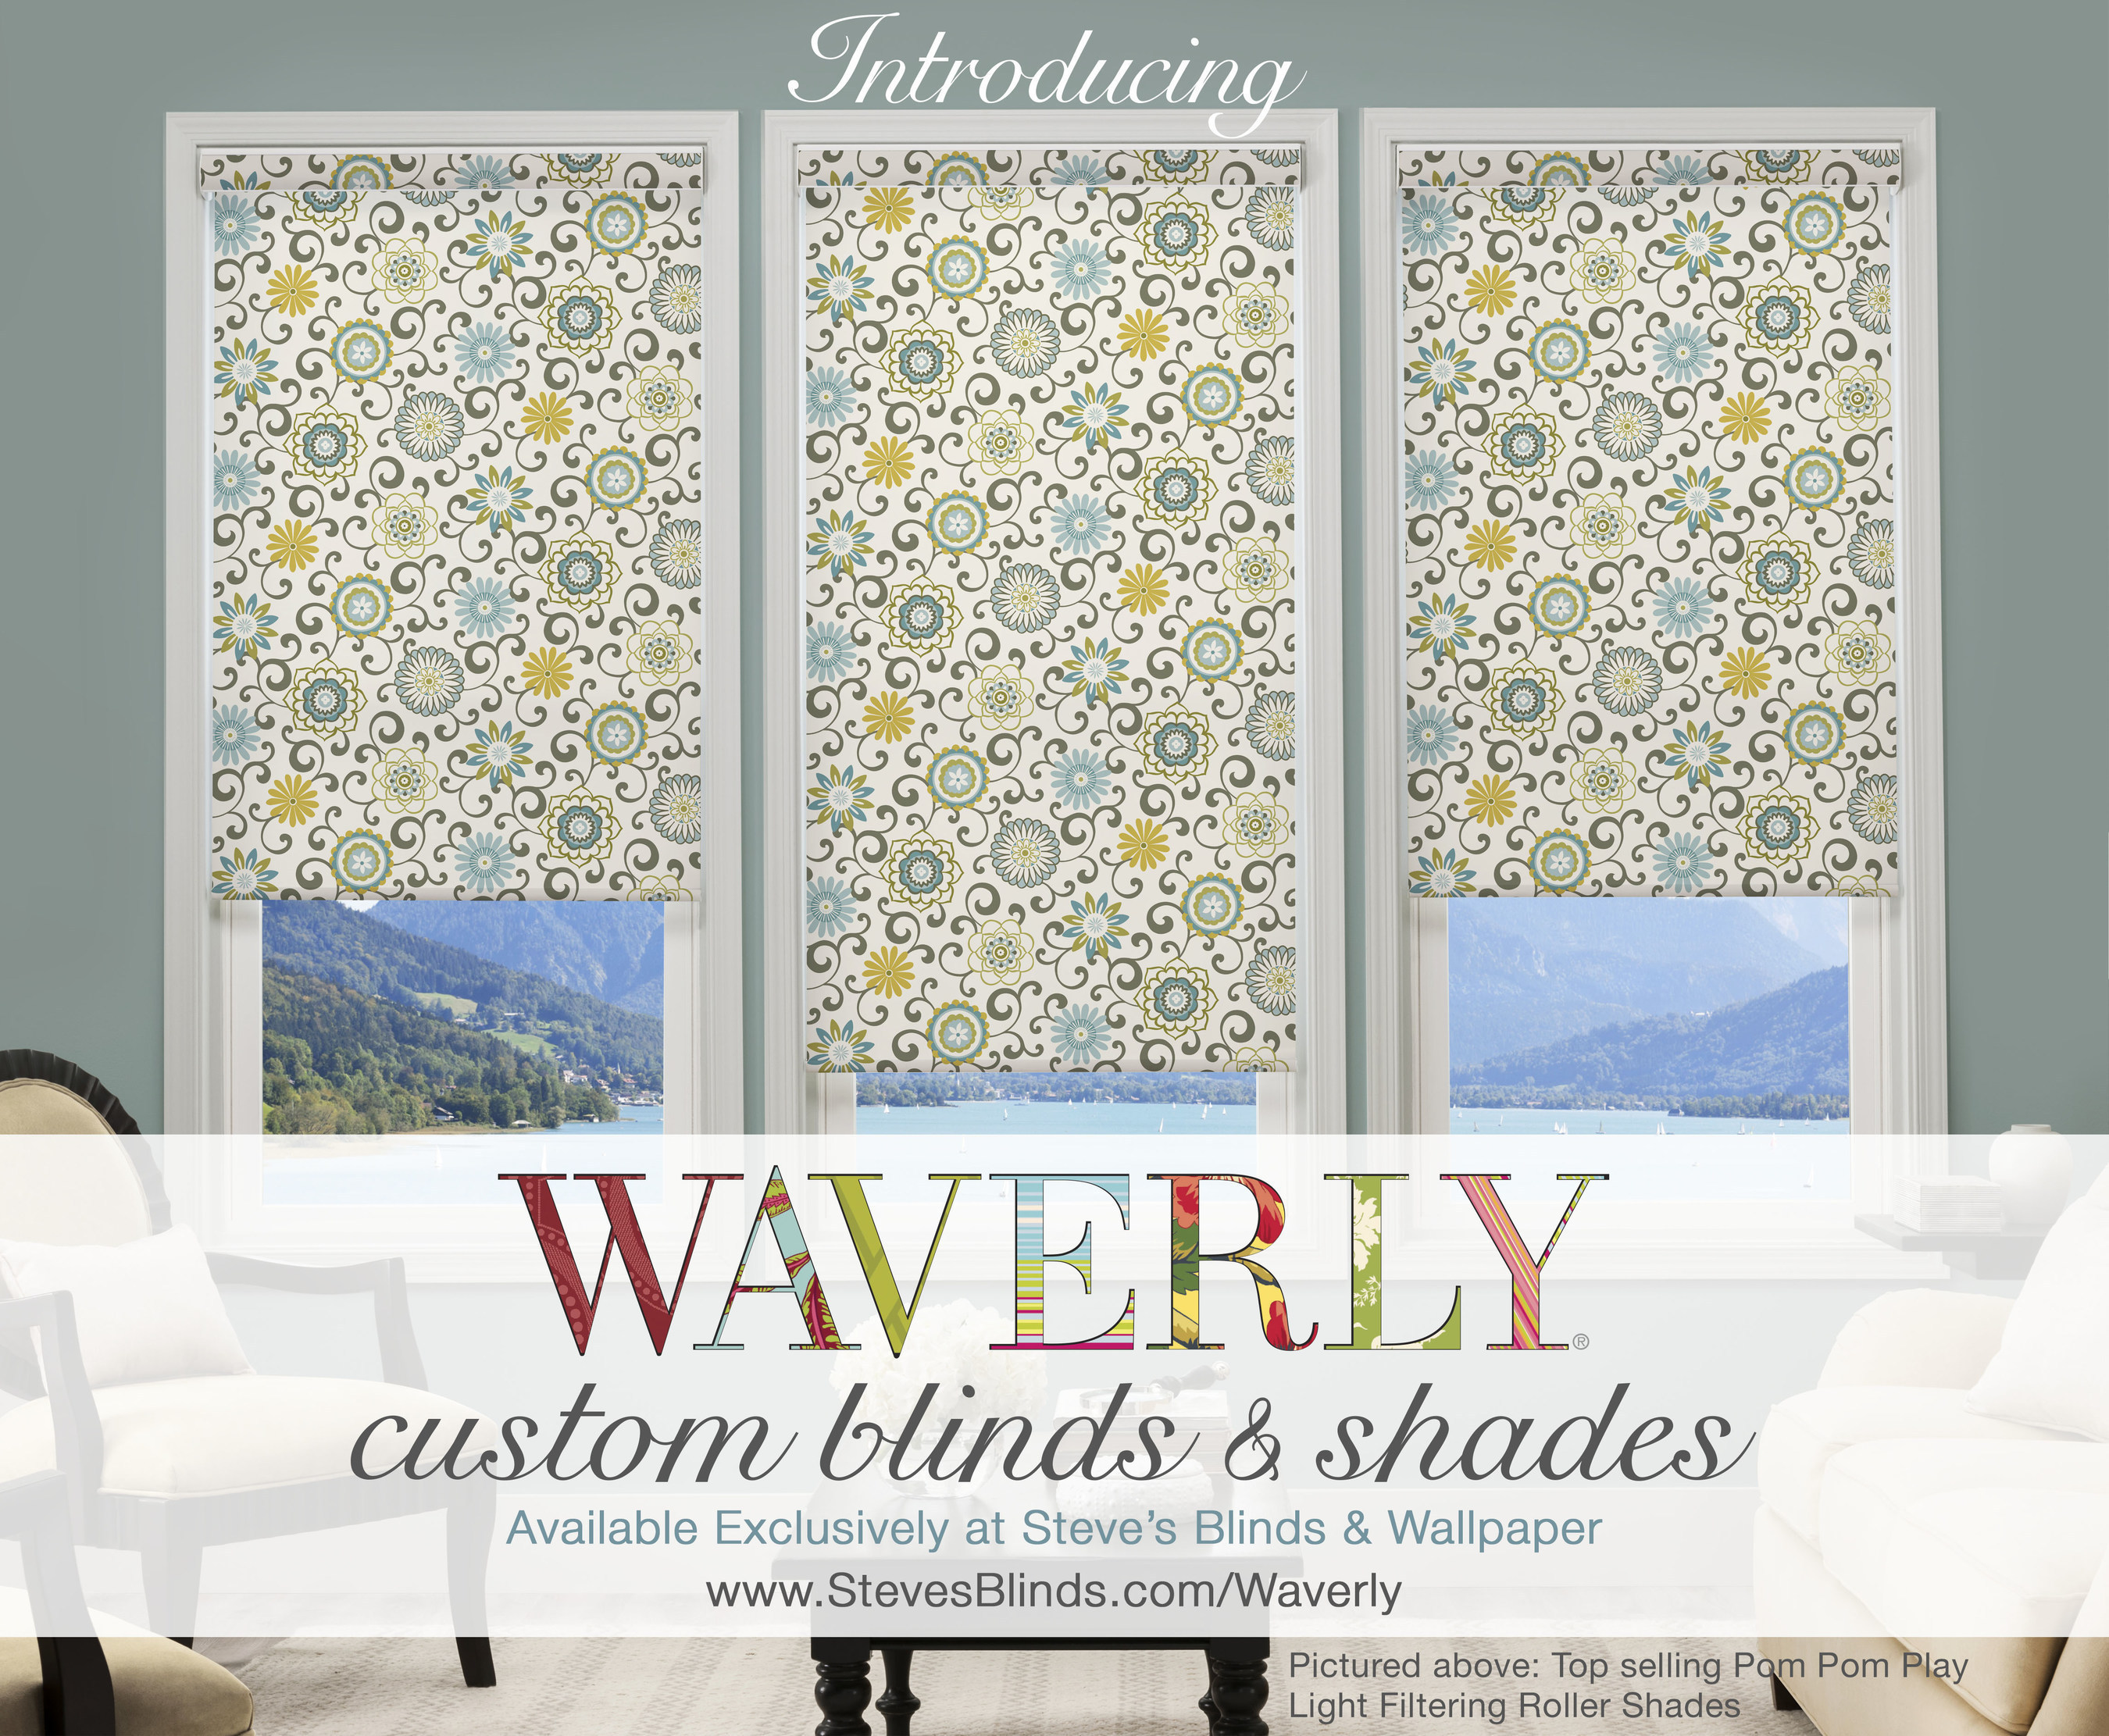 Steve's Blinds & Wallpaper, an industry leading blinds and wallpaper company, announces an exclusive partnership with iconic home fashion and lifestyle brand, Waverly, to launch a new product category - Waverly Custom Blinds & Shades.